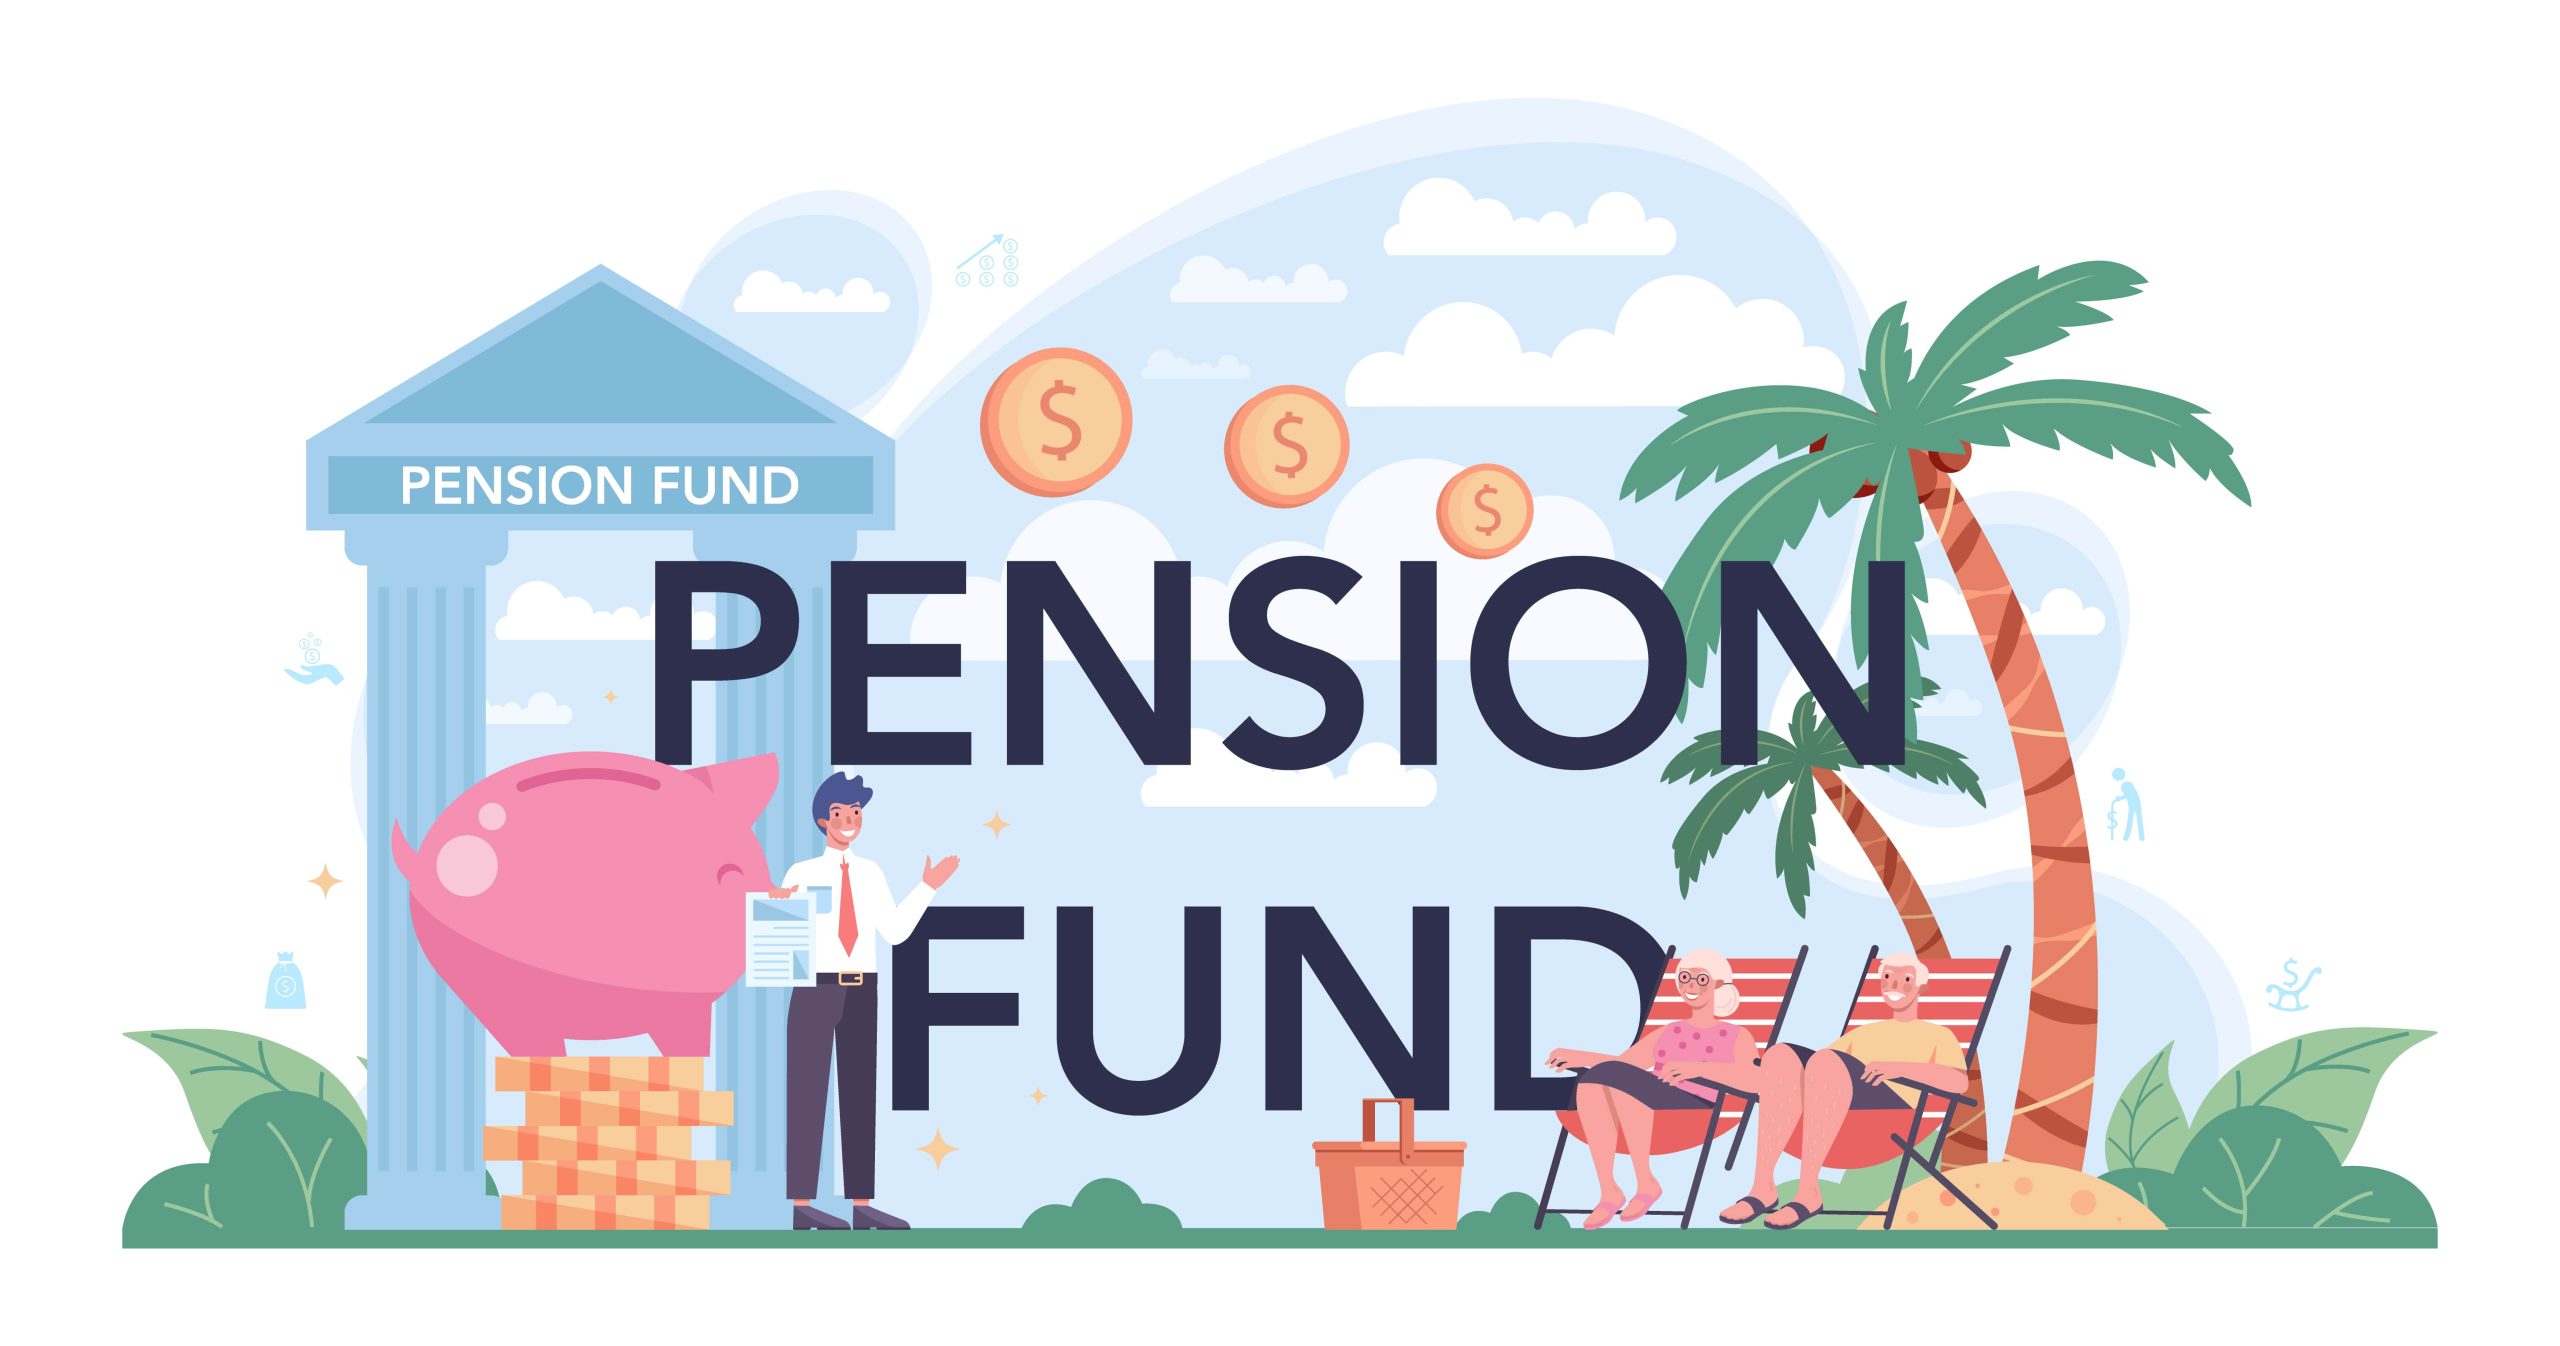 Pension Funding in the UK